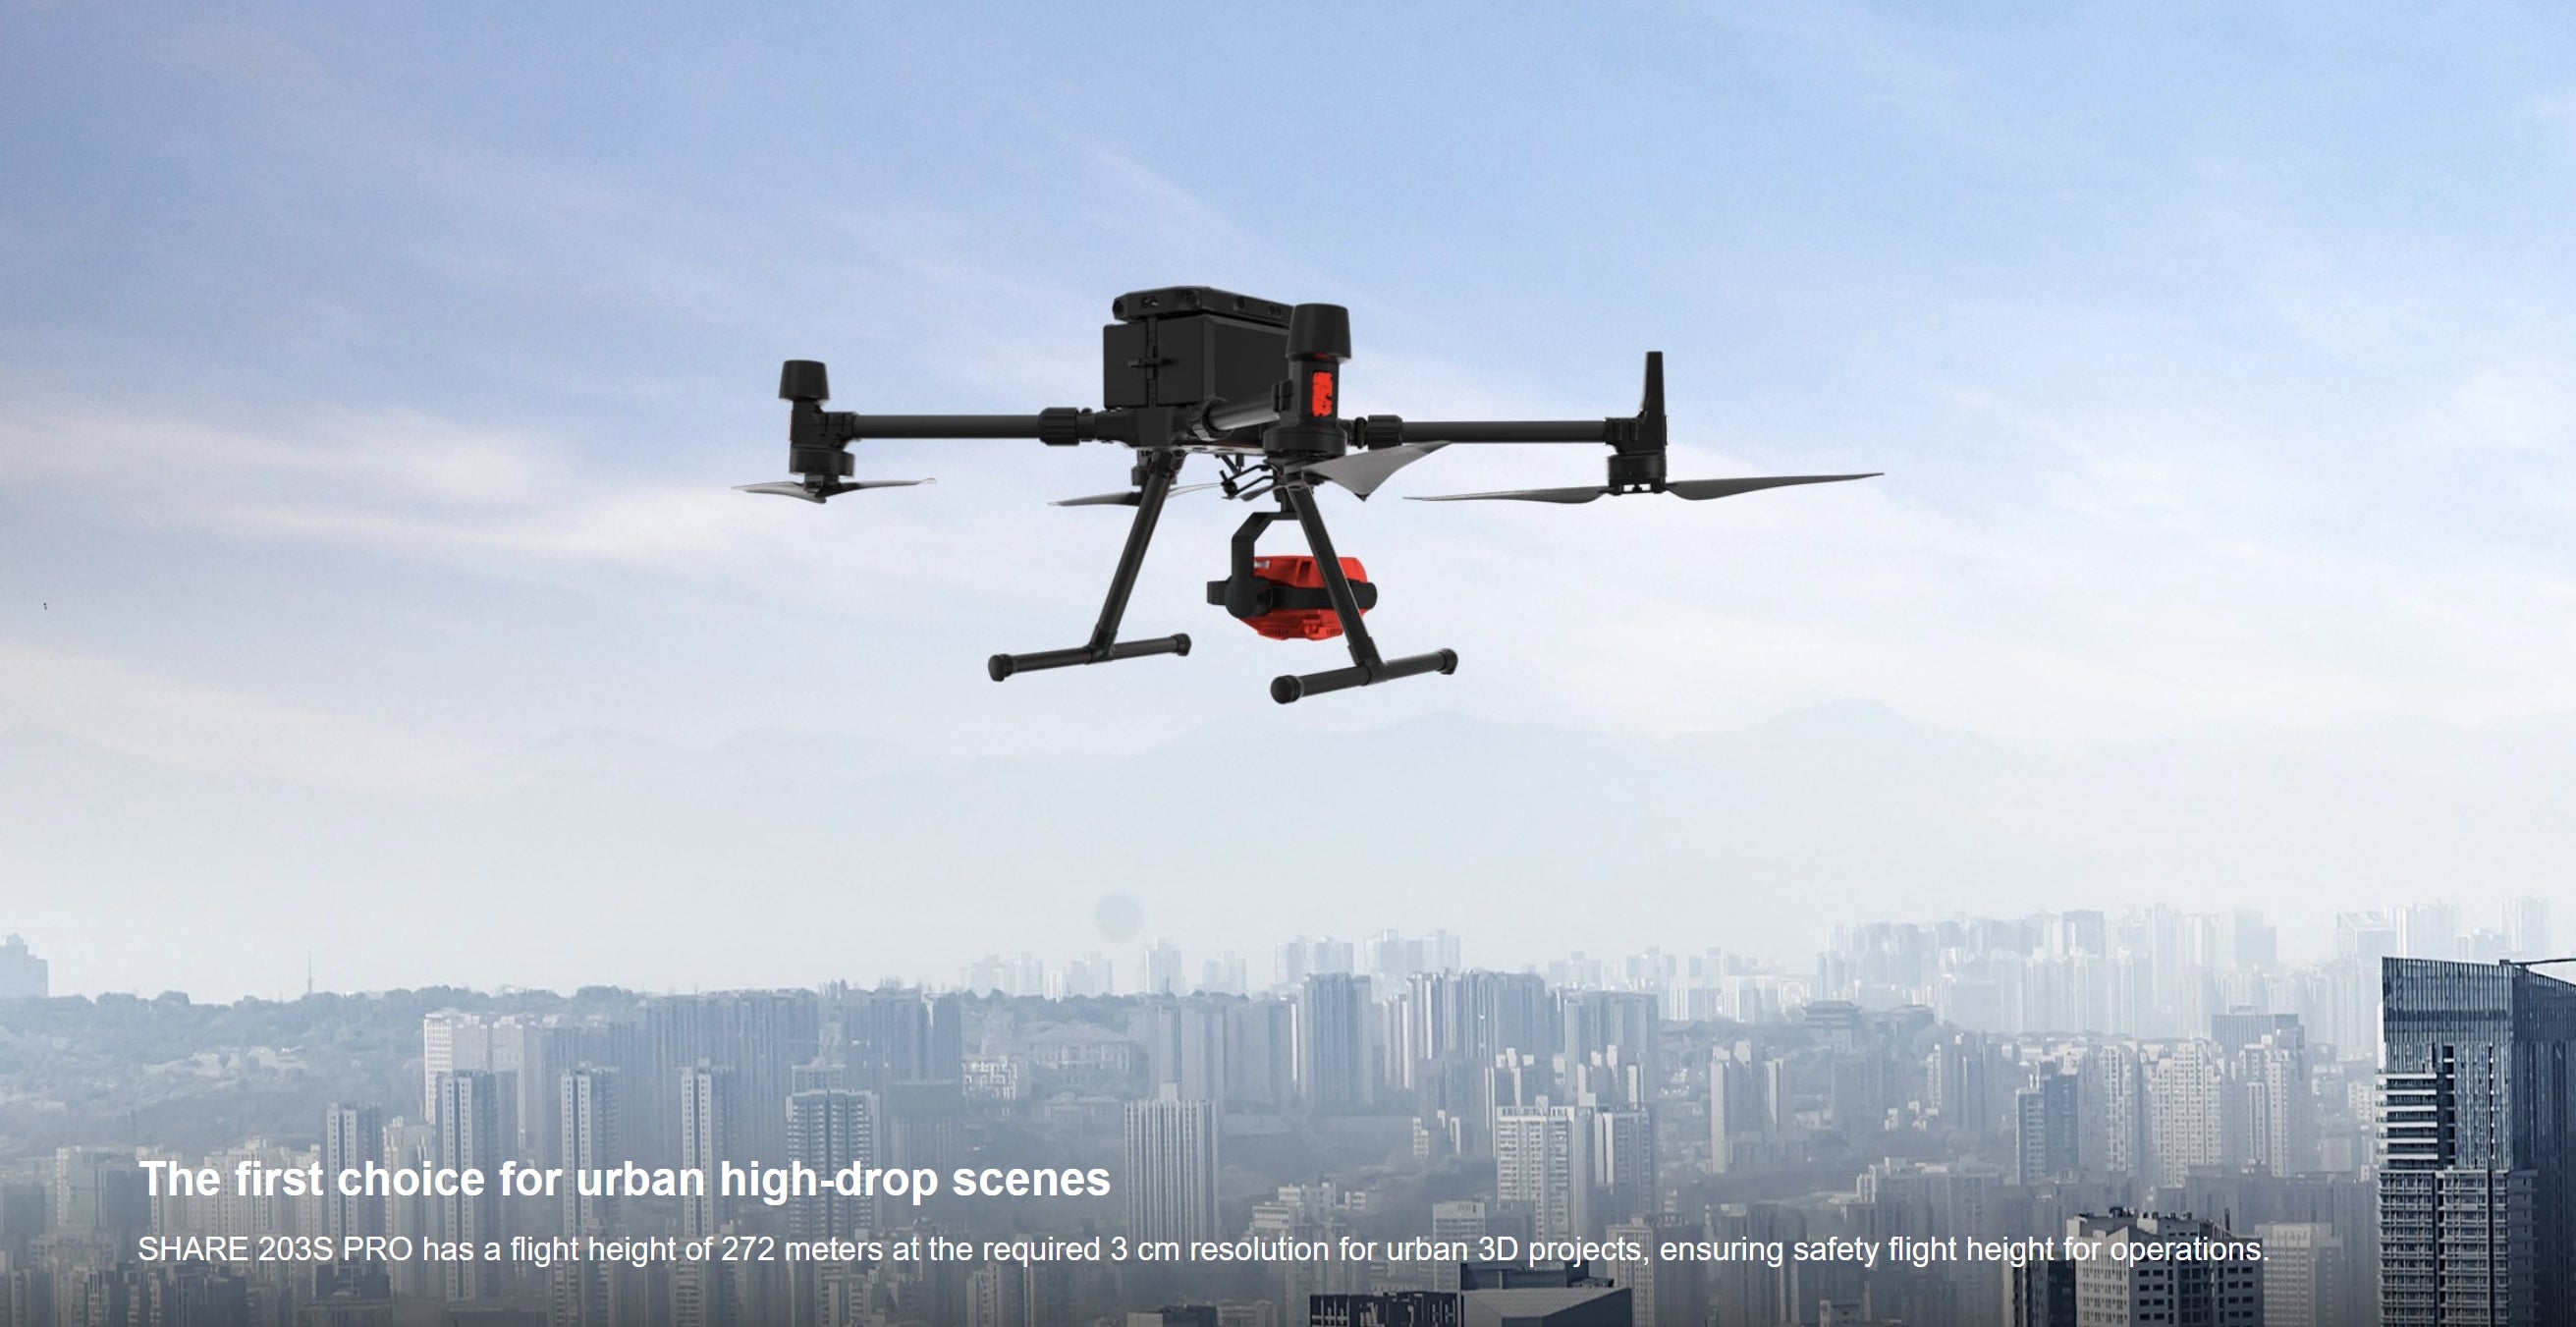 SHARE 203S PRO: Ideal for capturing urban high-rise scenes with precision and safety.